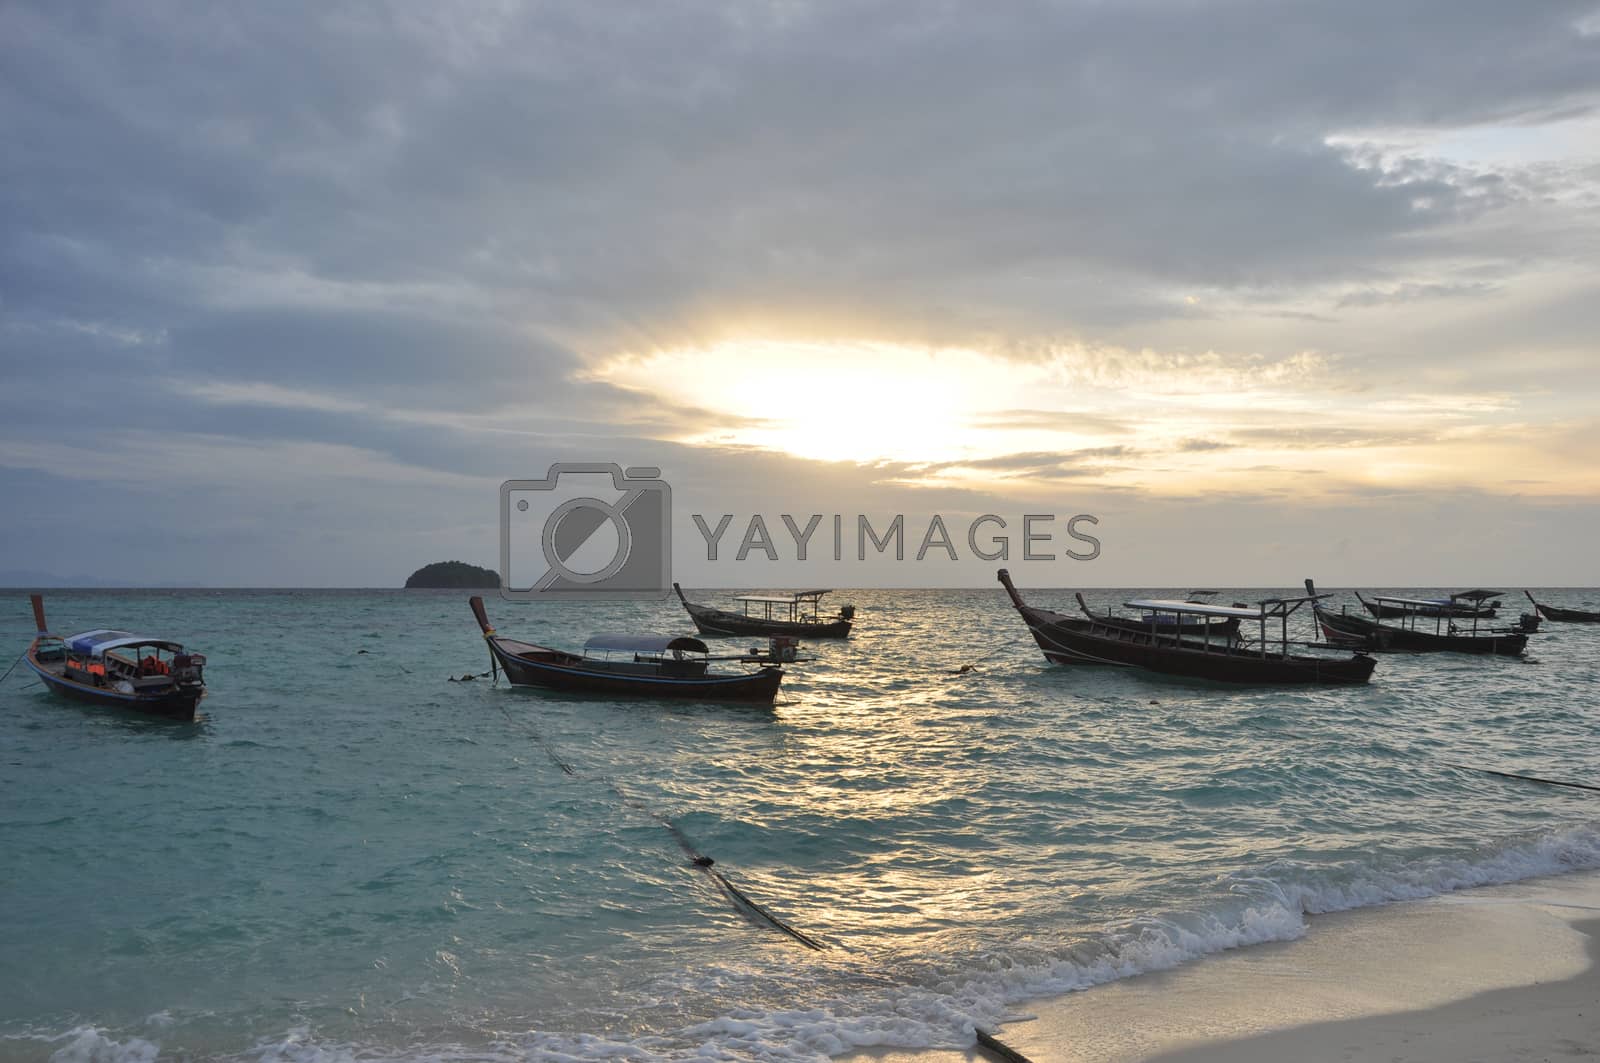 Royalty free image of Boat in the sea with sunrise background by ngarare